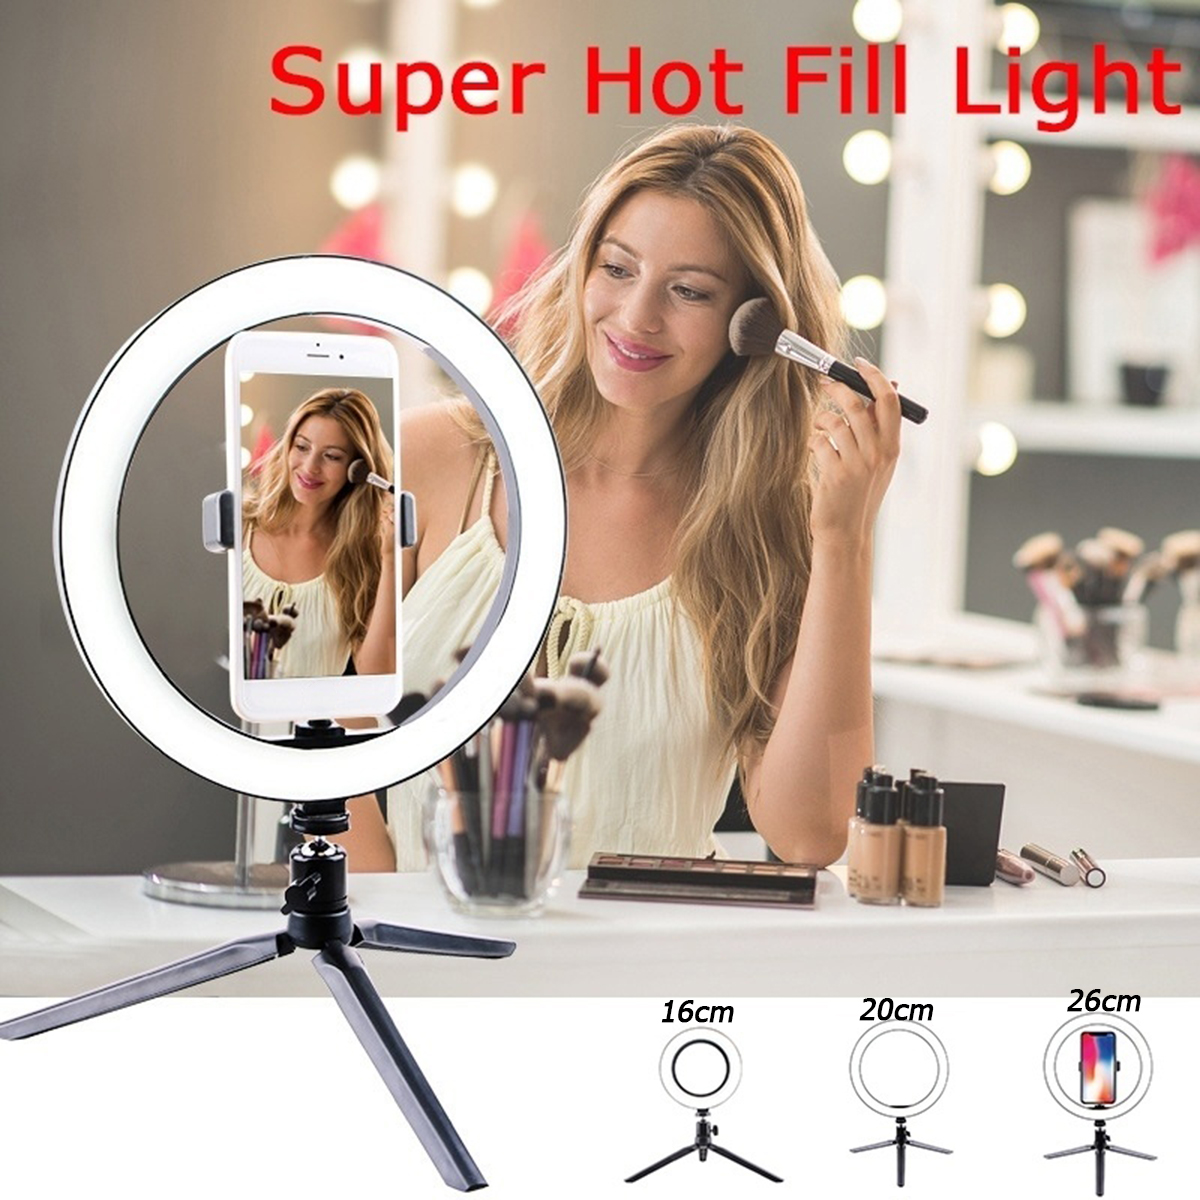 Portable-Ring-Light-LED-Makeup-Ring-Lamp-USB-Selfie-Ring-Lamp-Phone-Holder-Tripod-Stand-Photography--1579954-1